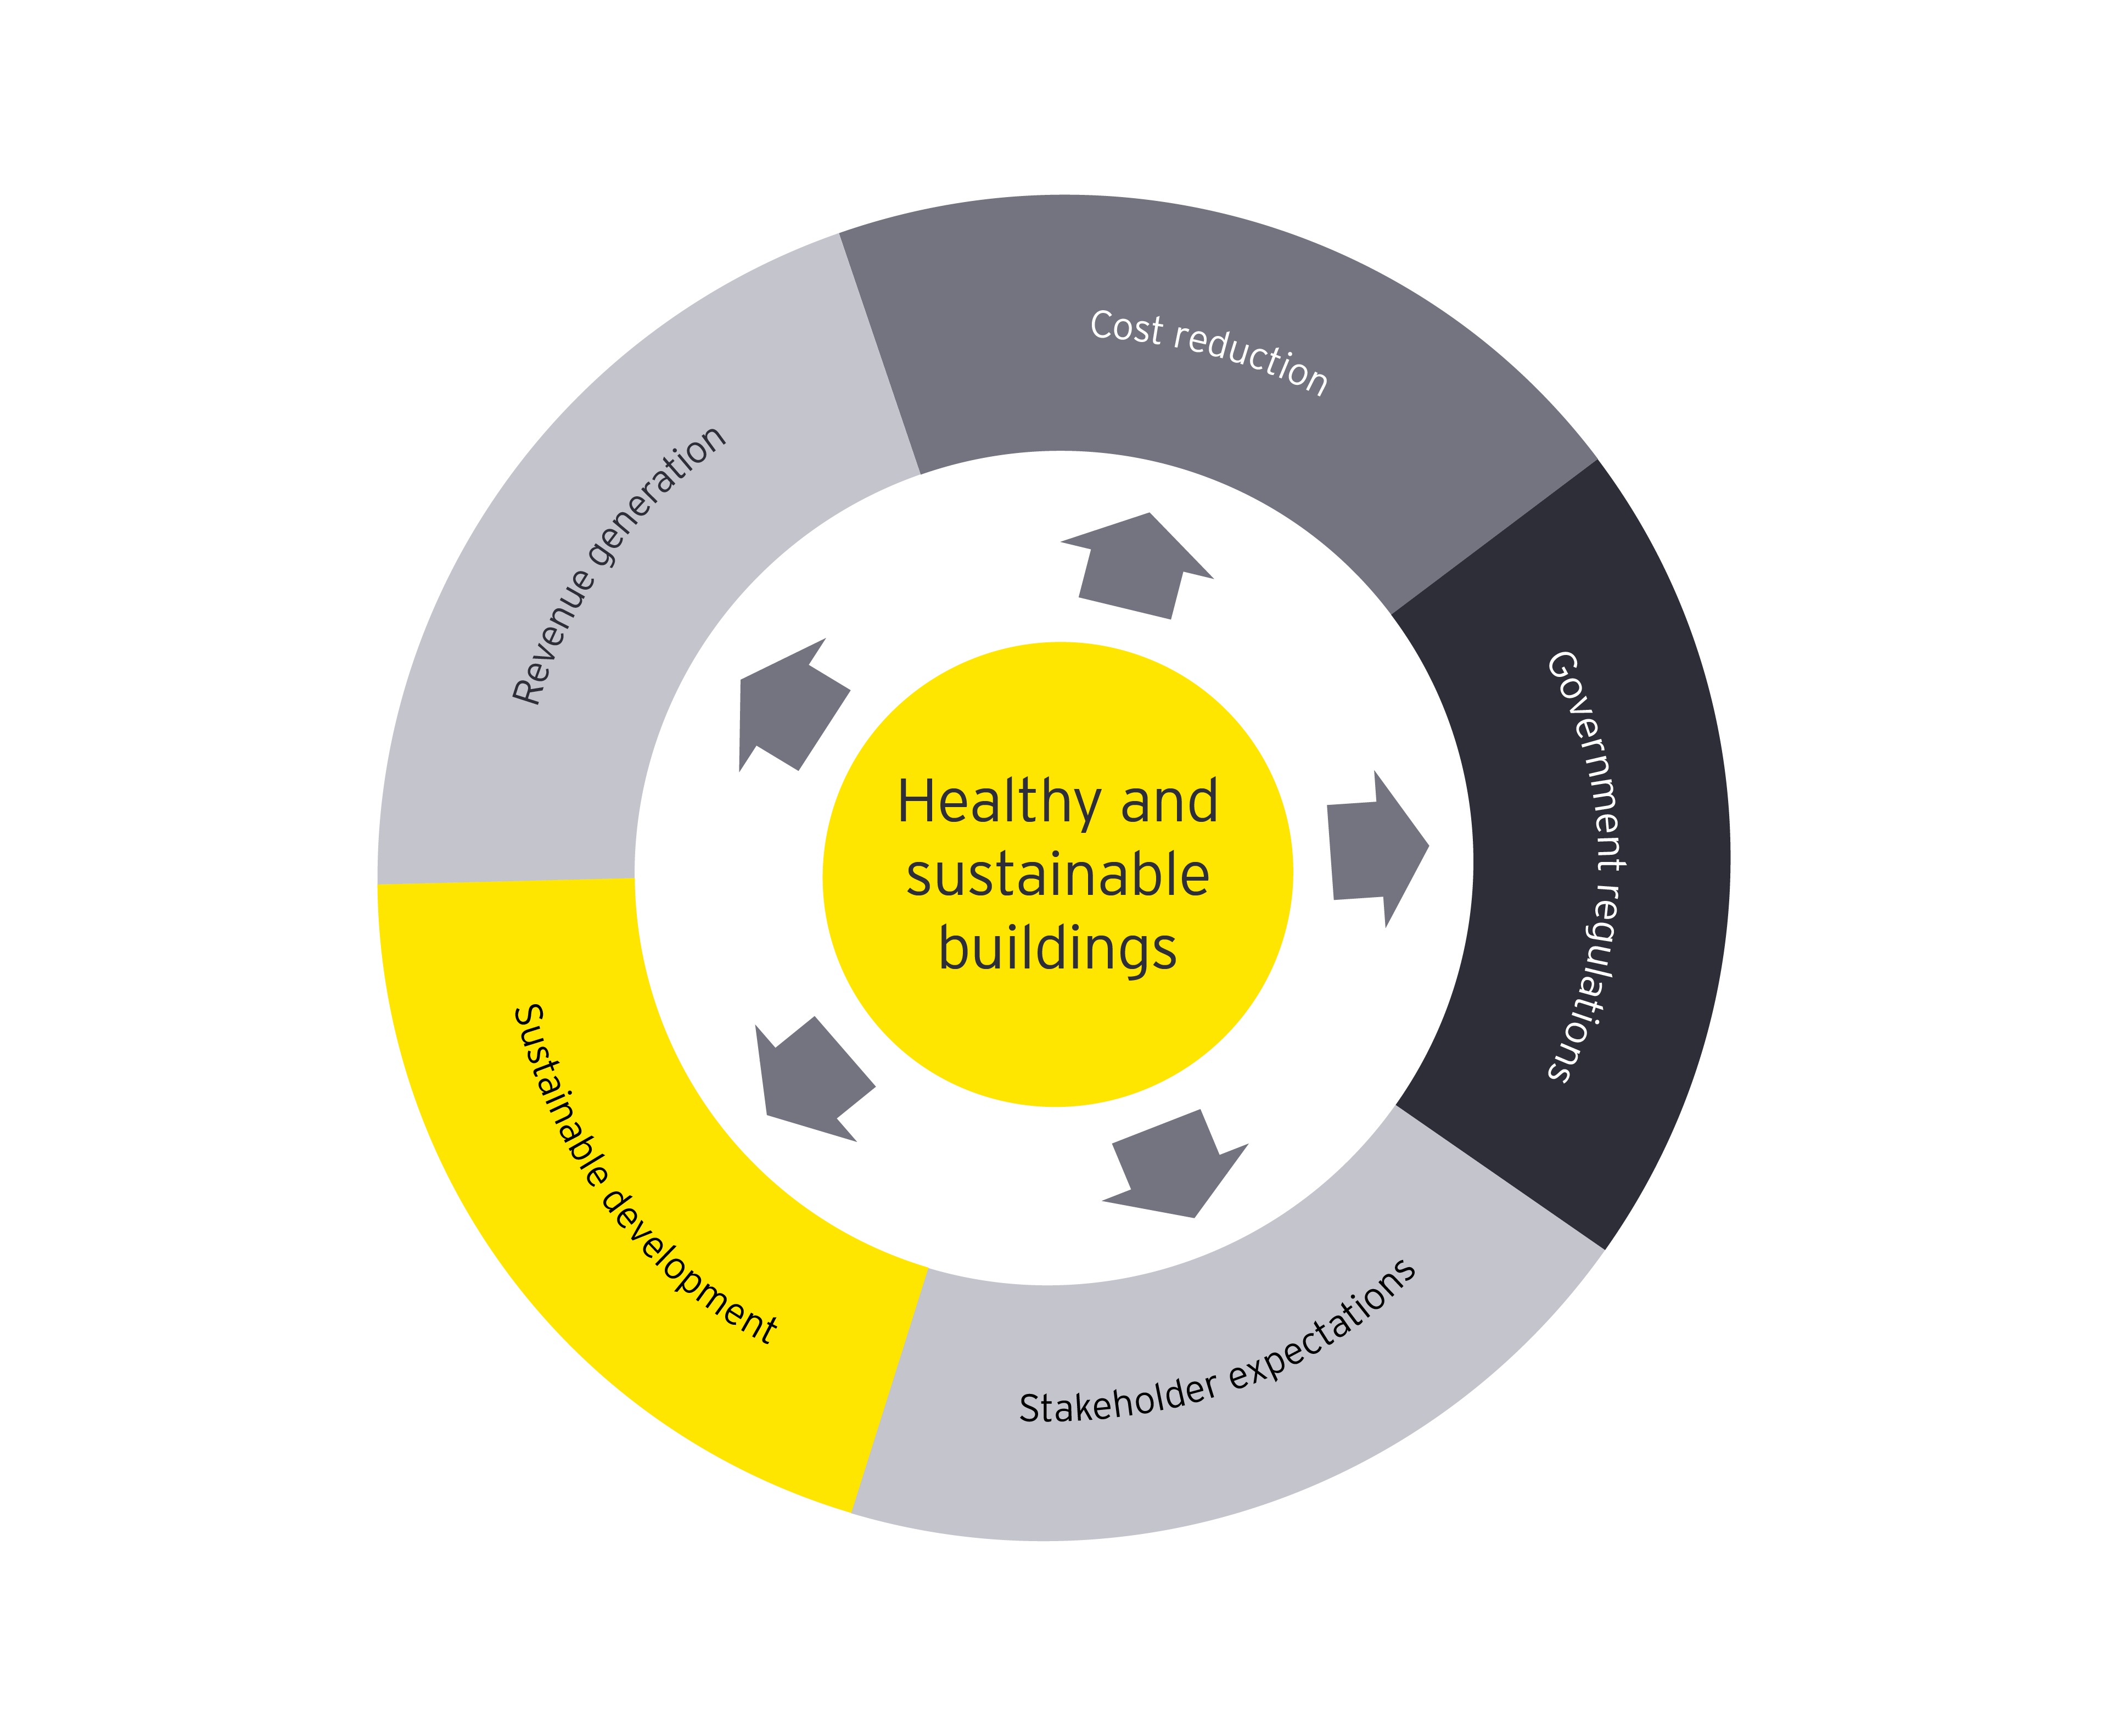 EY - Healthy and sustainable buildings